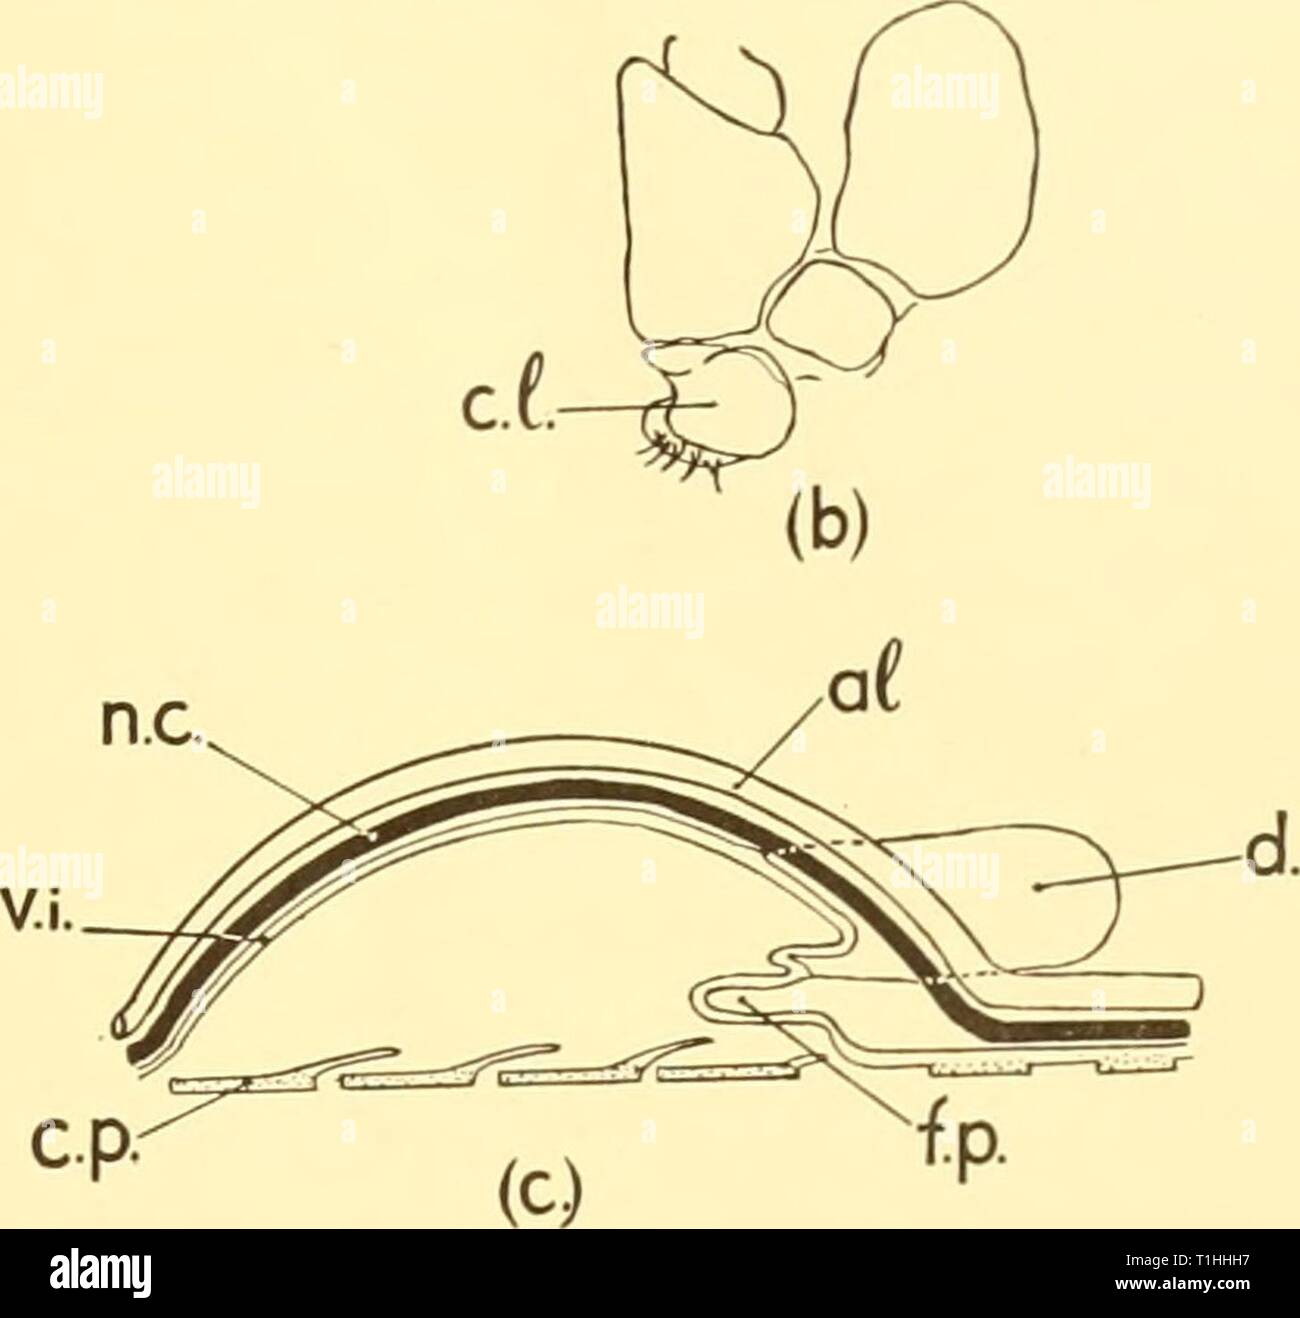 Discovery reports (1959) Discovery reports  discoveryreports29inst Year: 1959  Text-fig. 7. Edotia oculata. {a) Brood pouch from above, dorsal integument removed (diagrammatic), a.c. accessory- coxal plate; a.o. anterior opening of brood pouch; Cj, coxa of first pereiopod; c.p, coxal plate of first pereiopod, unfused; c.p.., coxal plate of second pereiopod, fused; c.p., coxal plate of fourth pereiopod, unfused; d, diverticulum of brood pouch; ex, soft extension of coxal plate; /.c./&gt;. free part of coxal plate; f.p. fold of posterior wall of brood pouch; /, limit of brood pouch ; Ip. hne sho Stock Photo